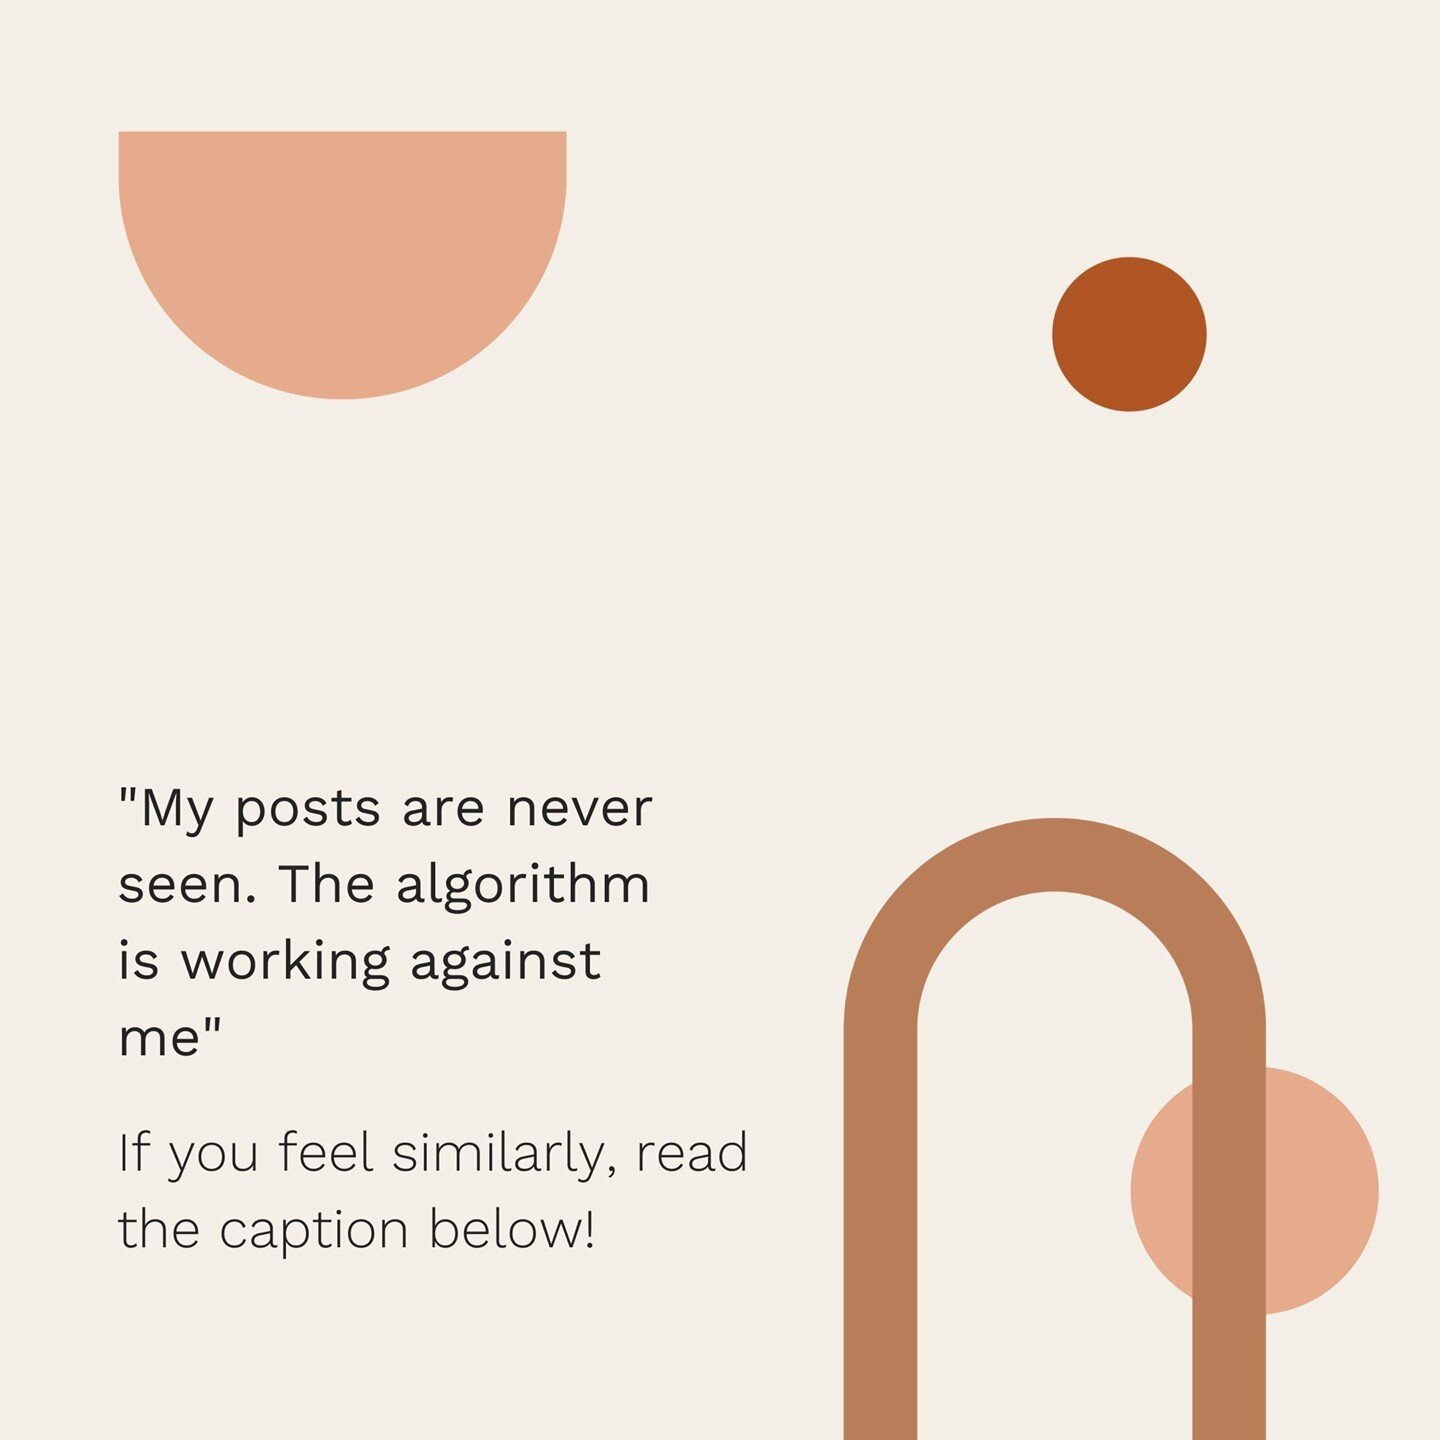 But is it?!⁠
⁠
I&rsquo;m constantly hearing complaints about the algorithm. &lsquo;The algorithm is terrible, I can&rsquo;t grow on Instagram&rsquo;.⁠
⁠
After you&rsquo;ve posted, do you blame the algorithm if it doesn&rsquo;t perform well?⁠
⁠
I can 